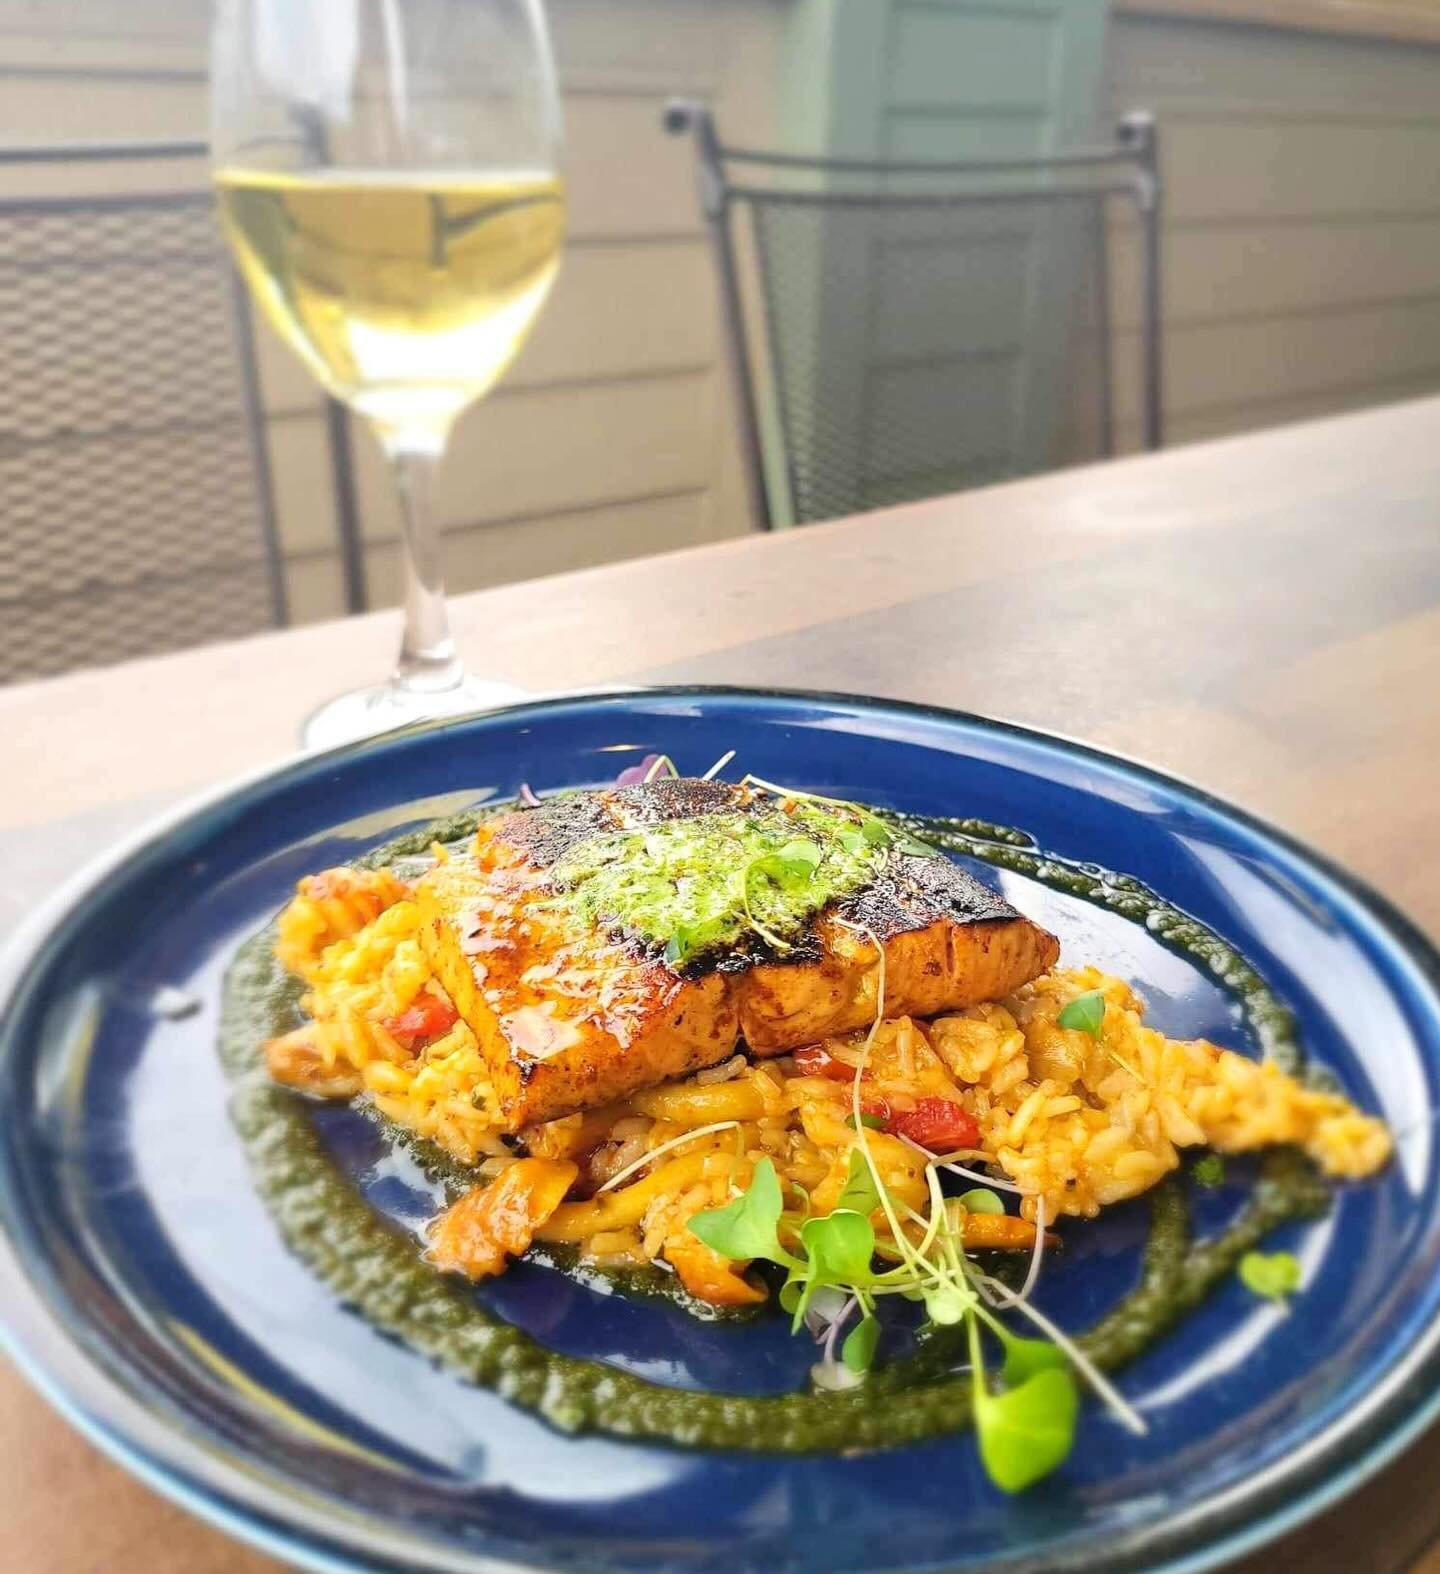 Happy Friday! To celebrate making it through the week, stop by to try our weekend special! We&rsquo;re dishing up this beautiful marinated salmon that&rsquo;s served with Carolina gold rice, cherry tomatoes, @highcountryfungi chestnut mushrooms, and 